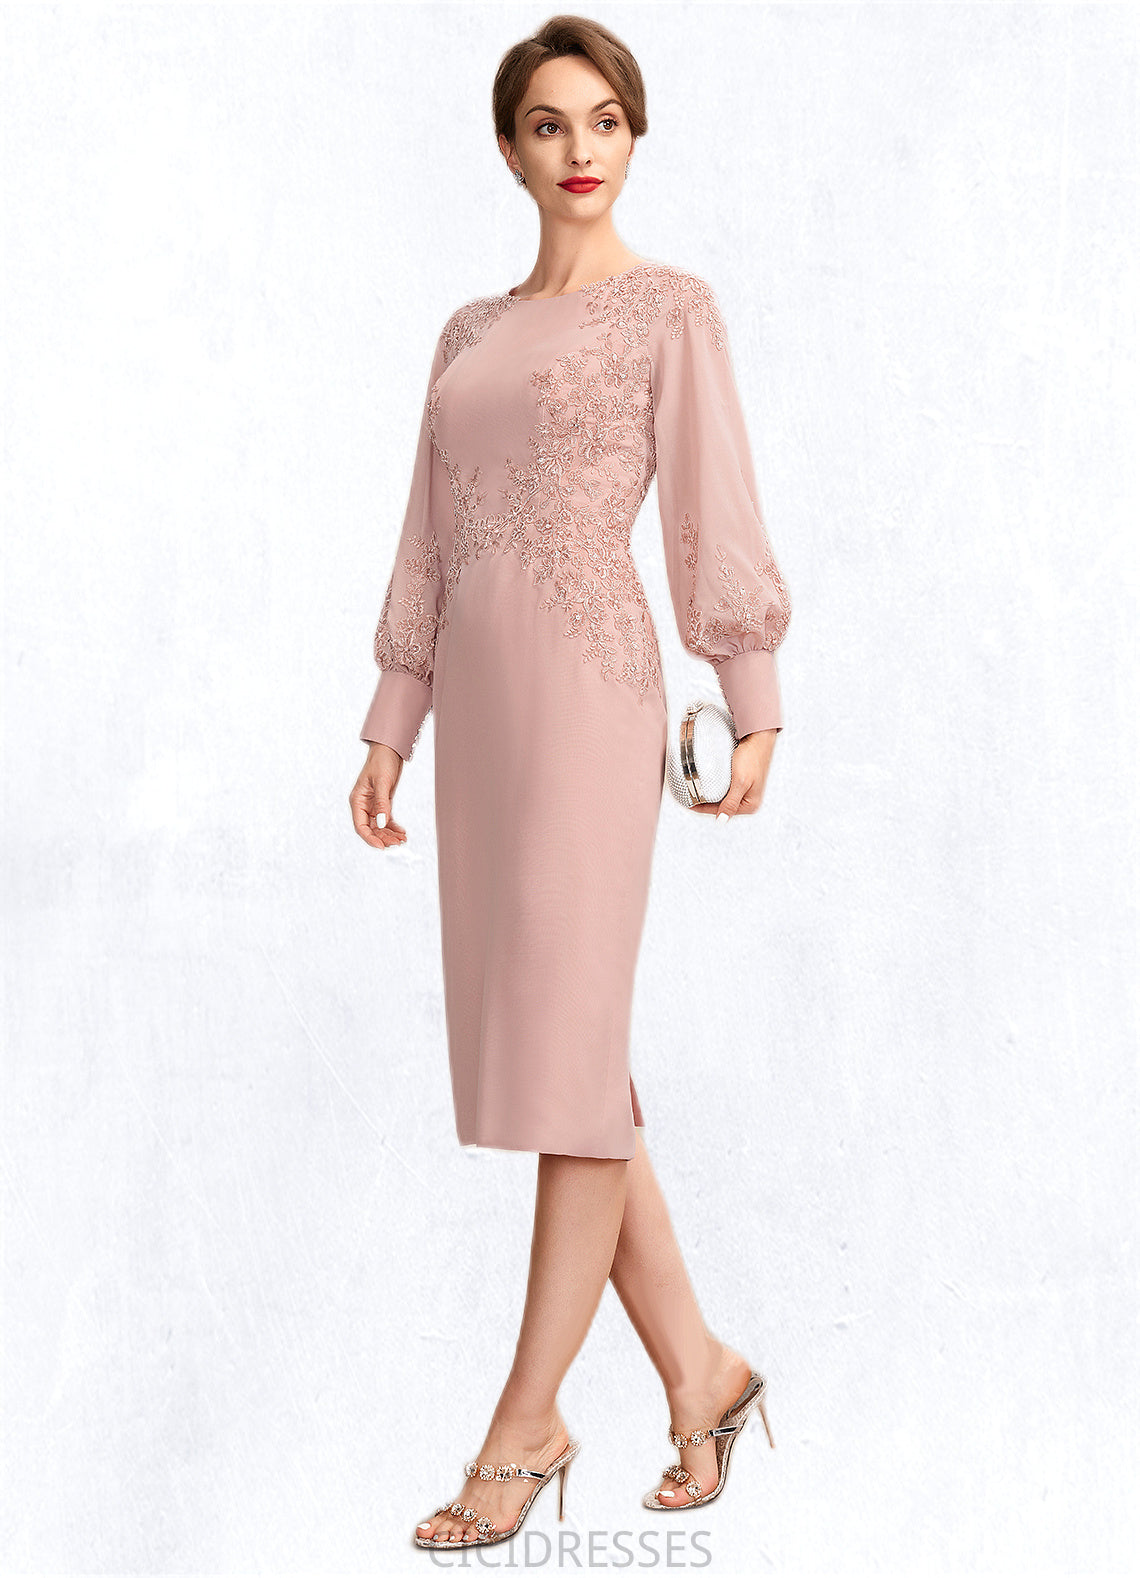 Michaela Sheath/Column Scoop Neck Knee-Length Chiffon Lace Mother of the Bride Dress With Beading Sequins CIC8126P0015020